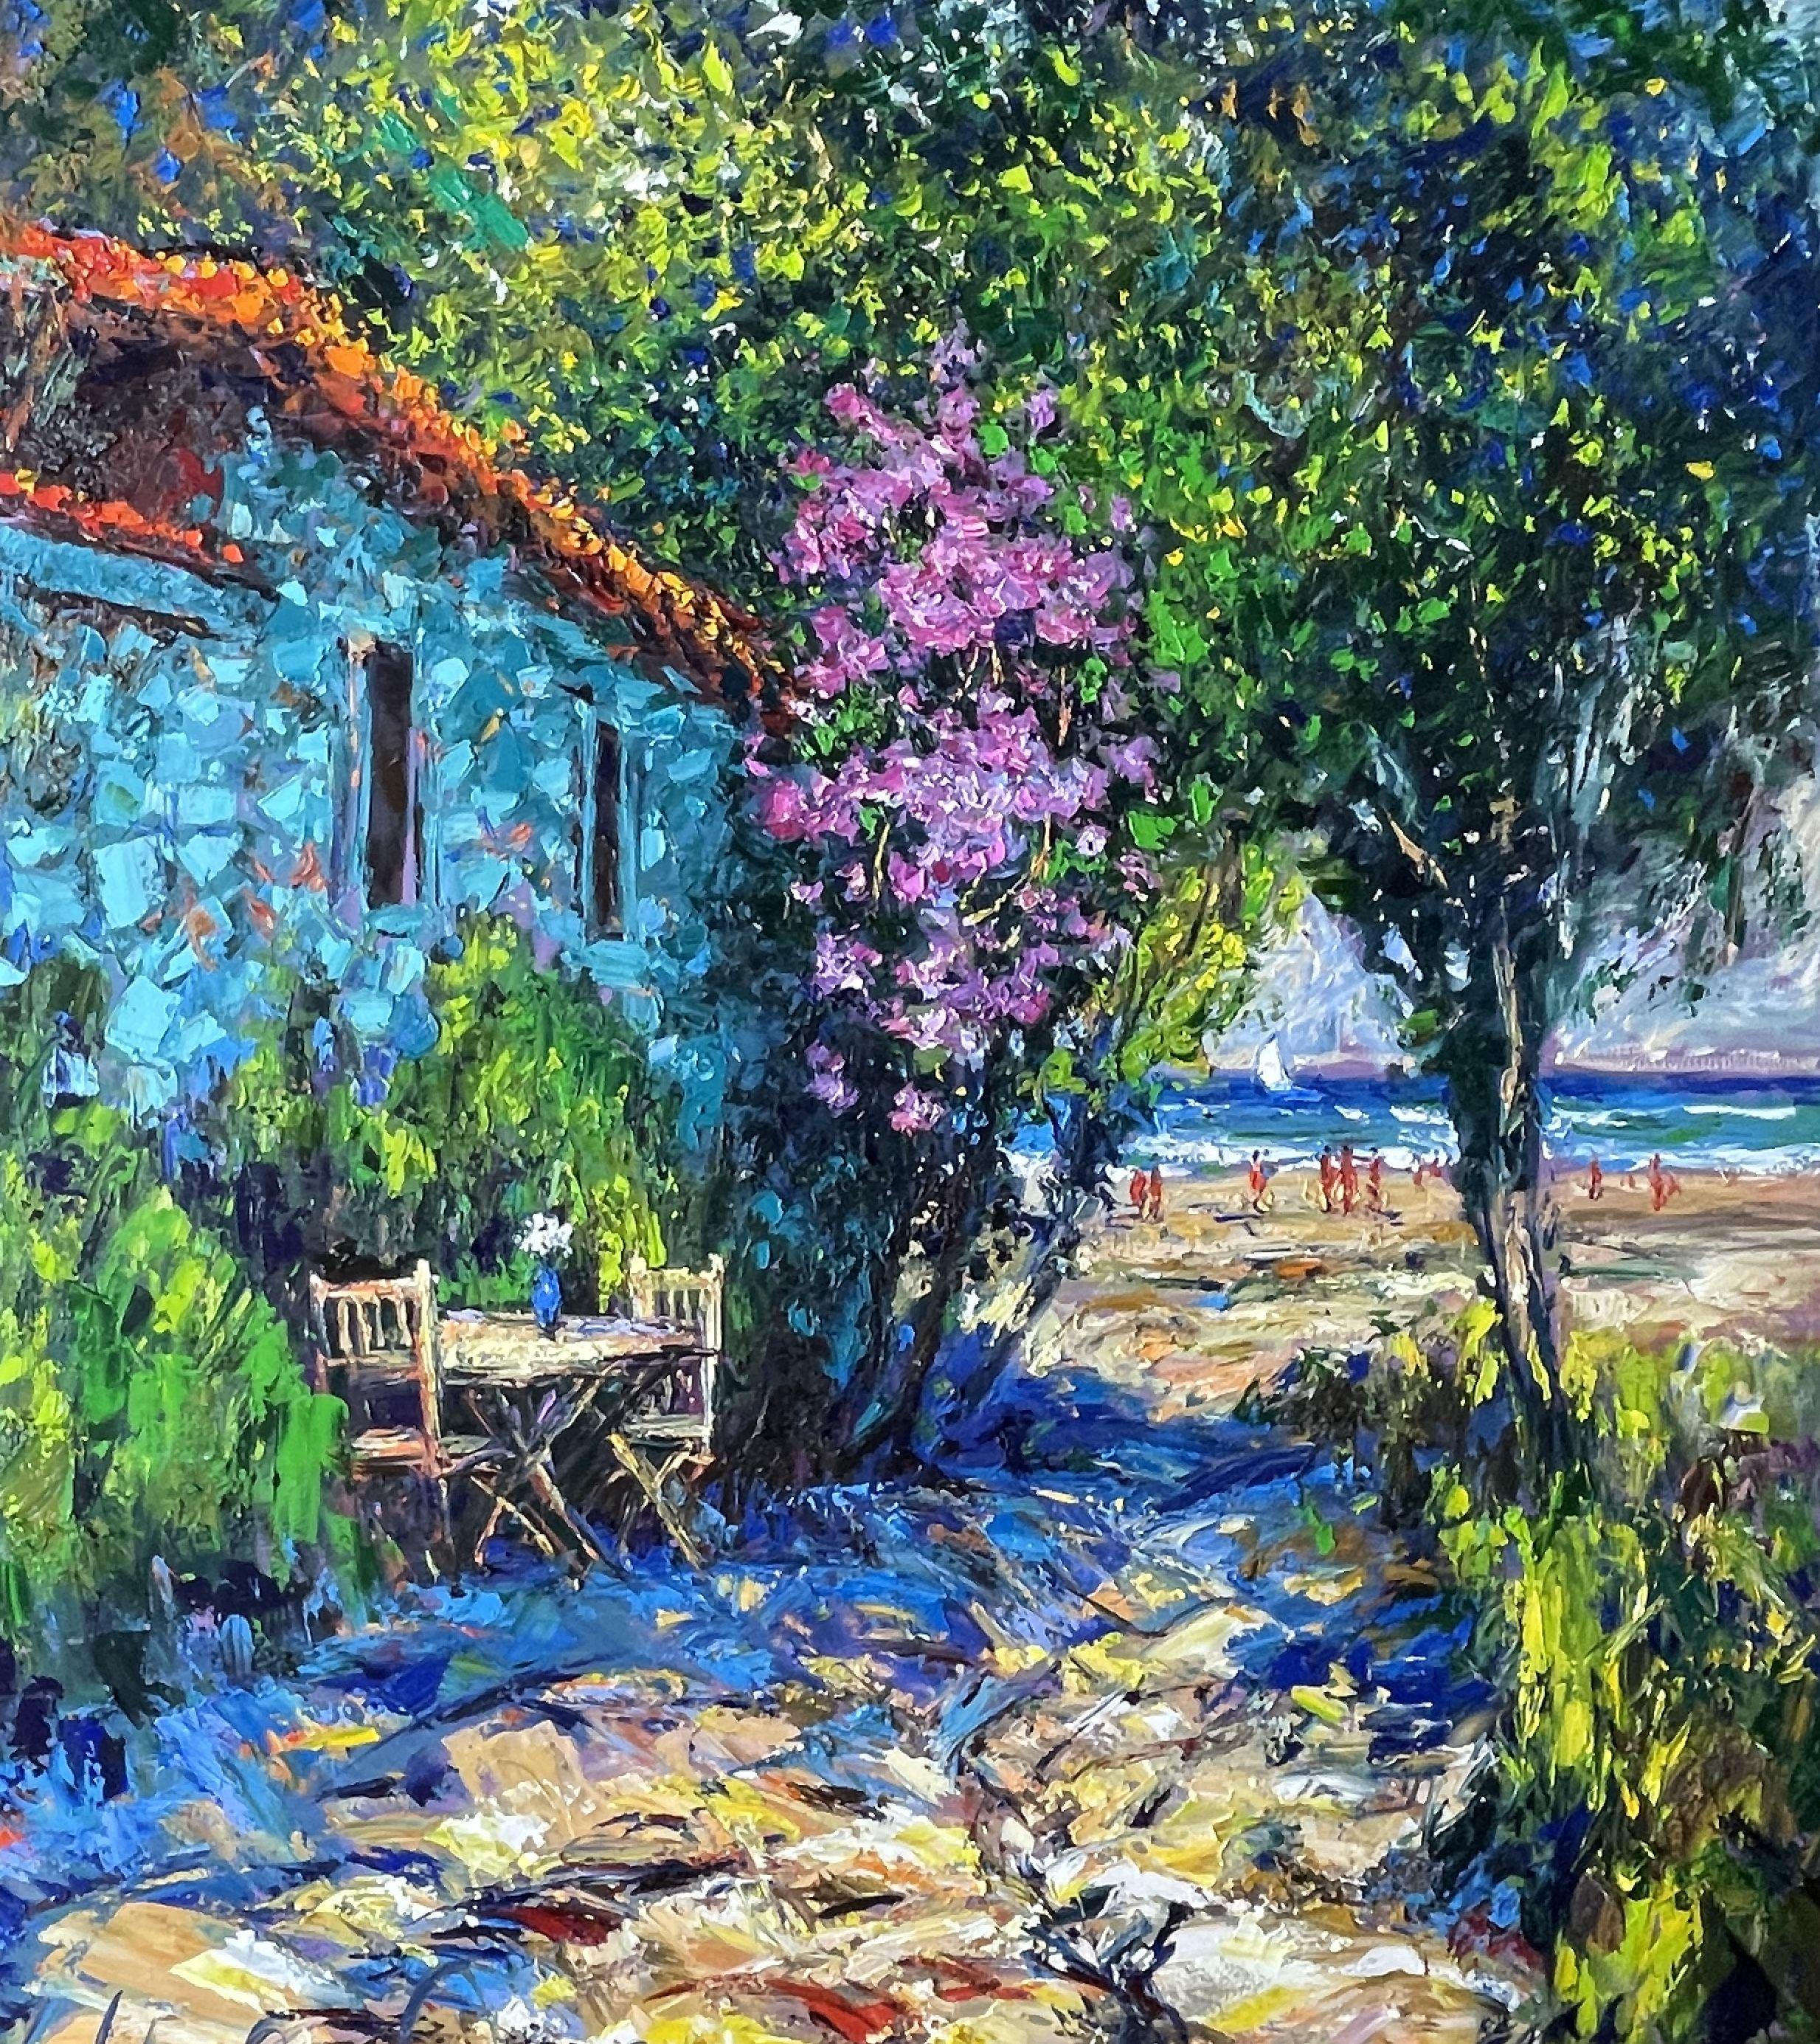 This work of art (Fabulous day in Marmaris) is a one-of-a-kind bright colorful canvas. I make really bright colors. I painted in the free style of the Impasto Impressionists.    Painted with high quality oil paints on artistic stretched canvas, this